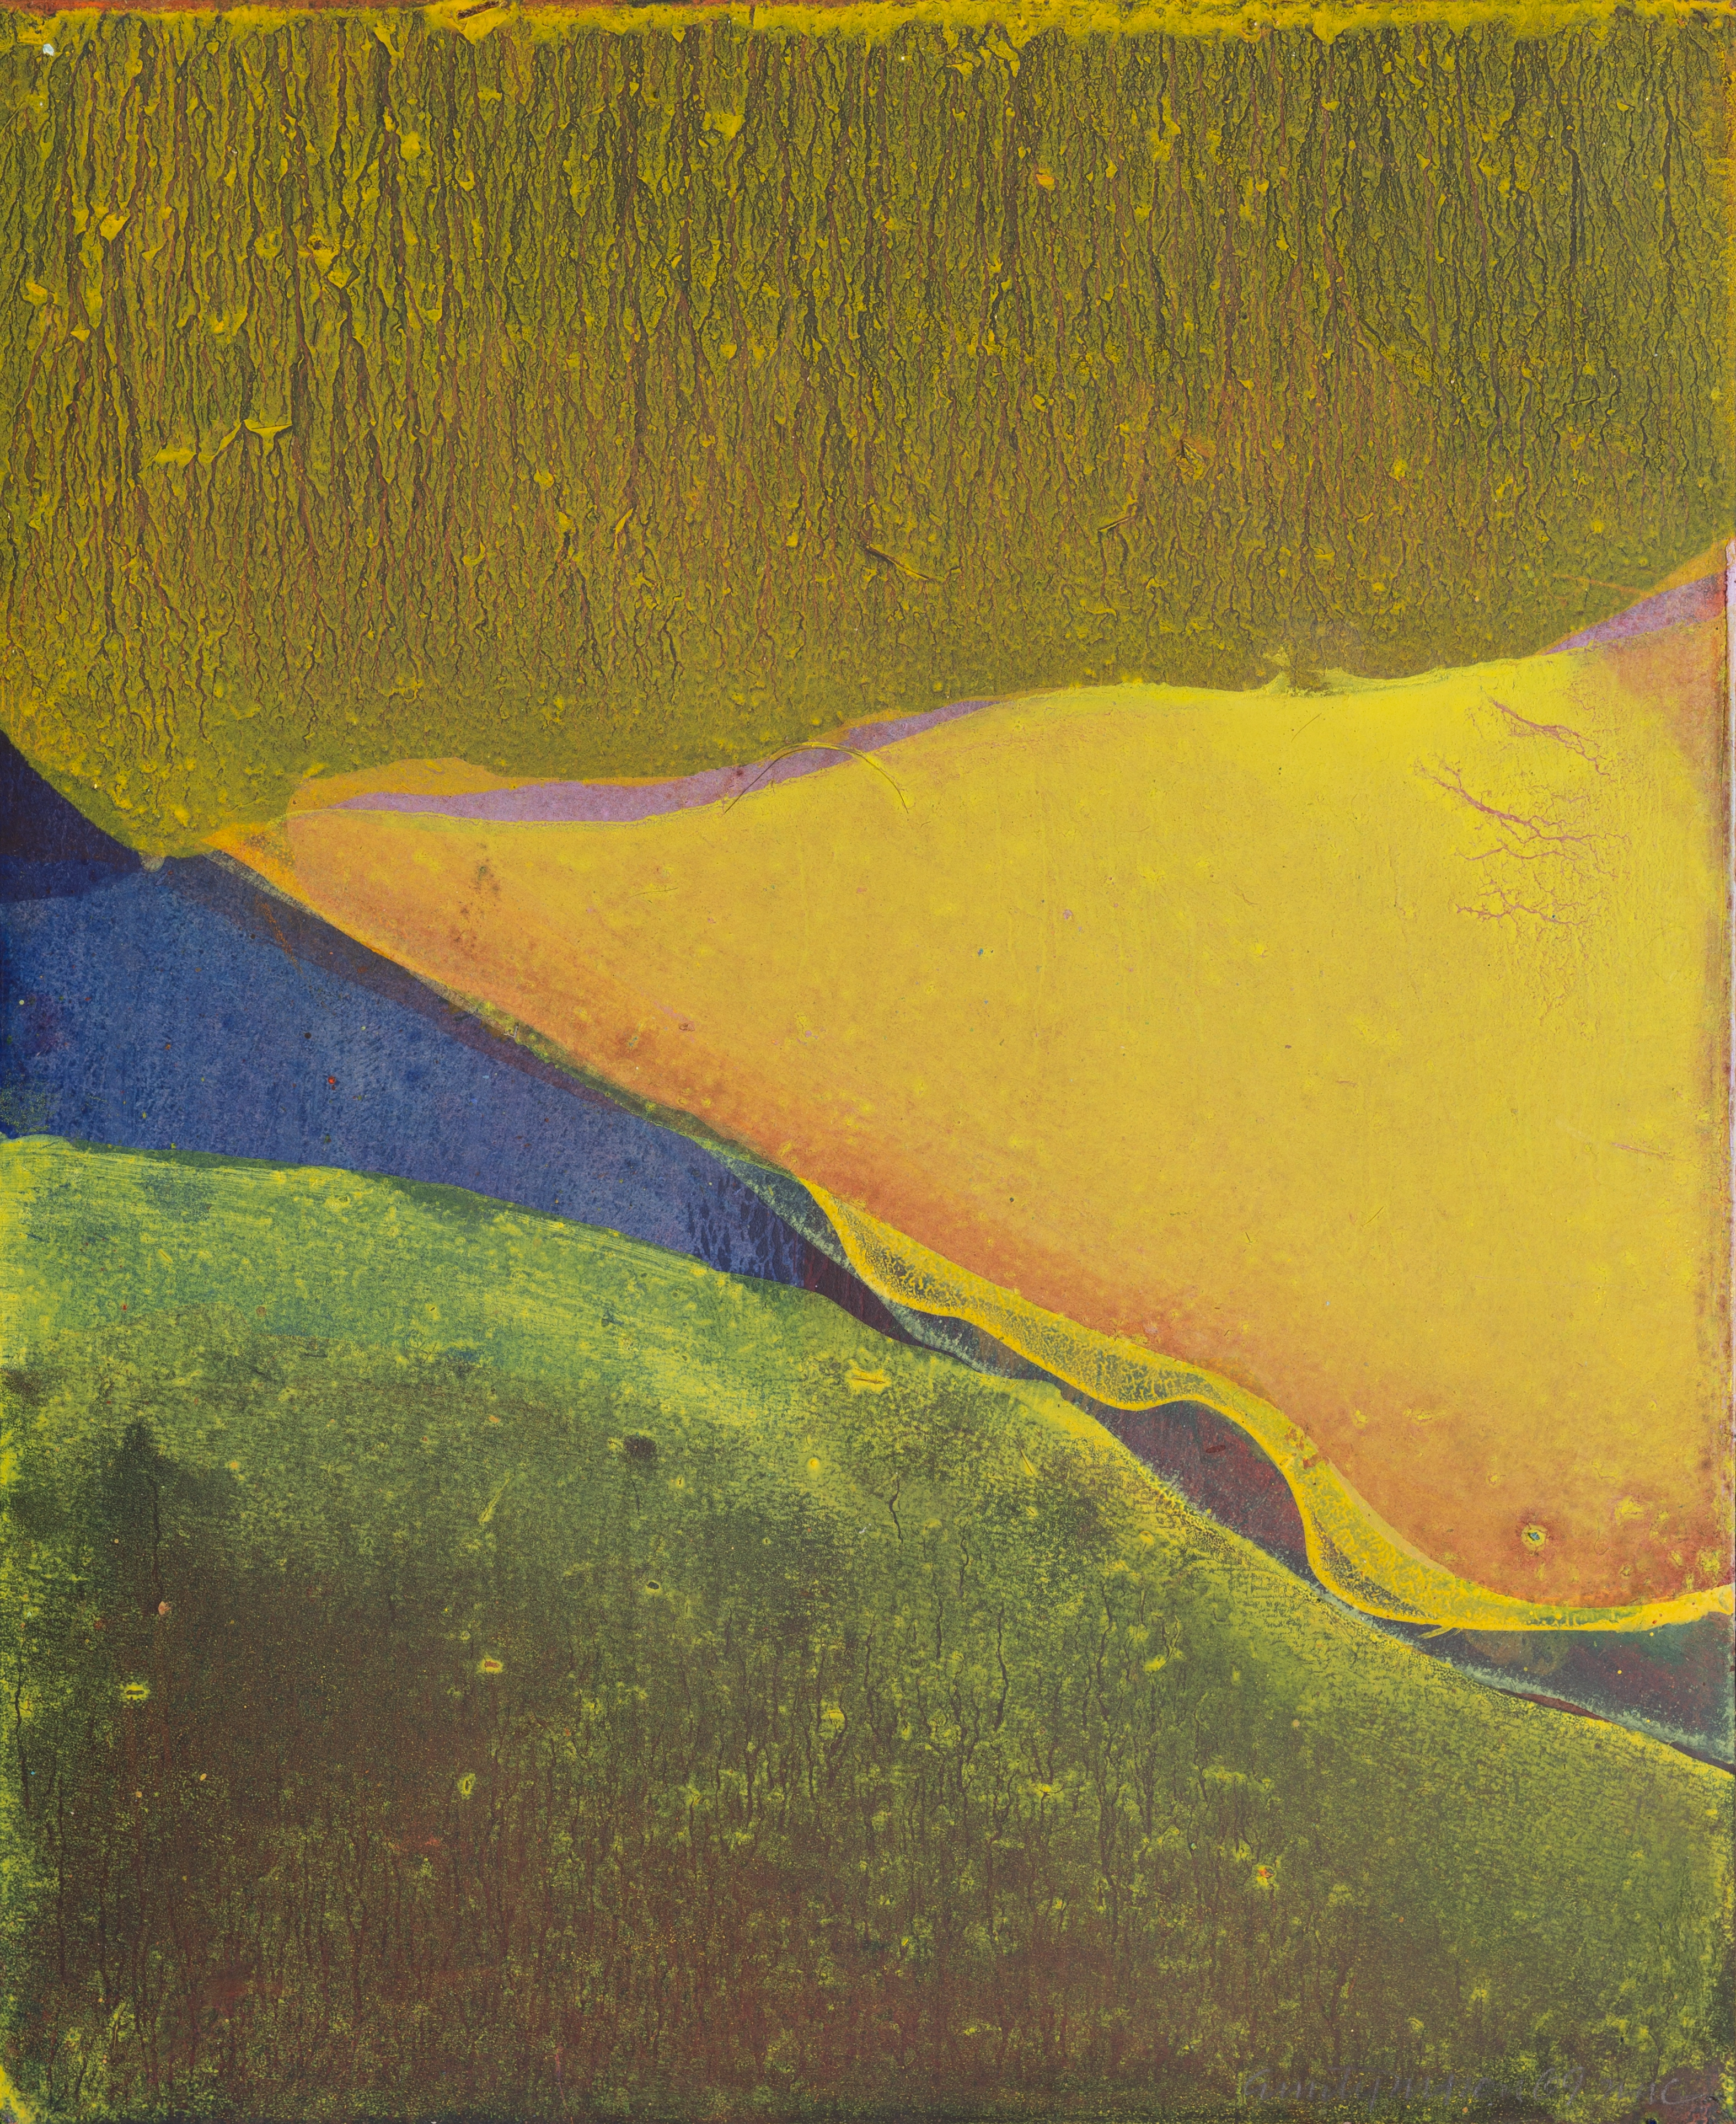 Abstract oil on paper work comprised of yellow, green, and blue washes of color.